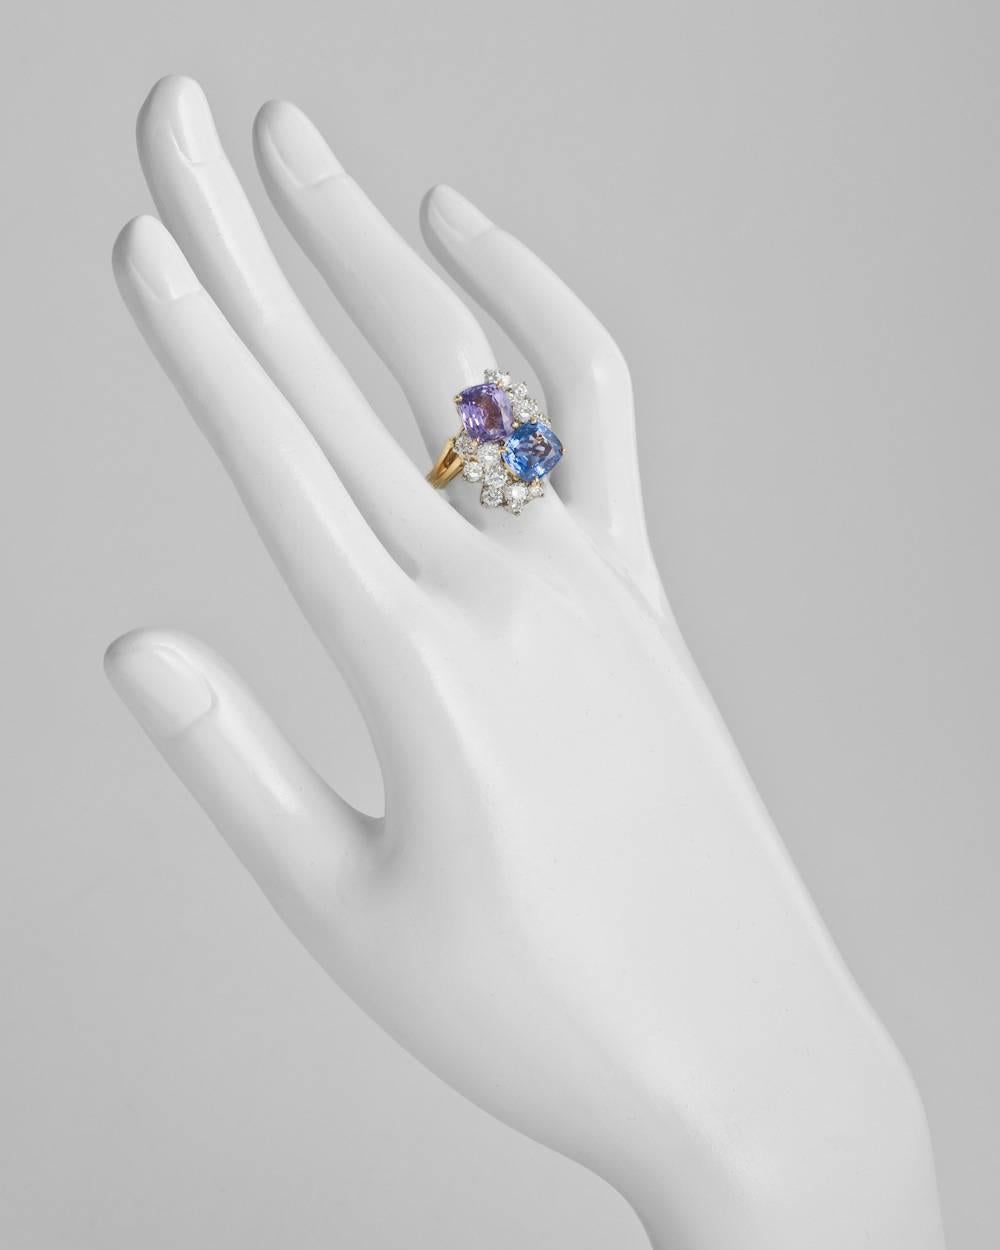 Multicolored sapphire and diamond twin ring, centering on a cushion-shaped blue sapphire weighing approximately 2.45 carats and a cushion-shaped purple sapphire weighing approximately 2.58 carats, accented by a circular-cut diamond cluster on either